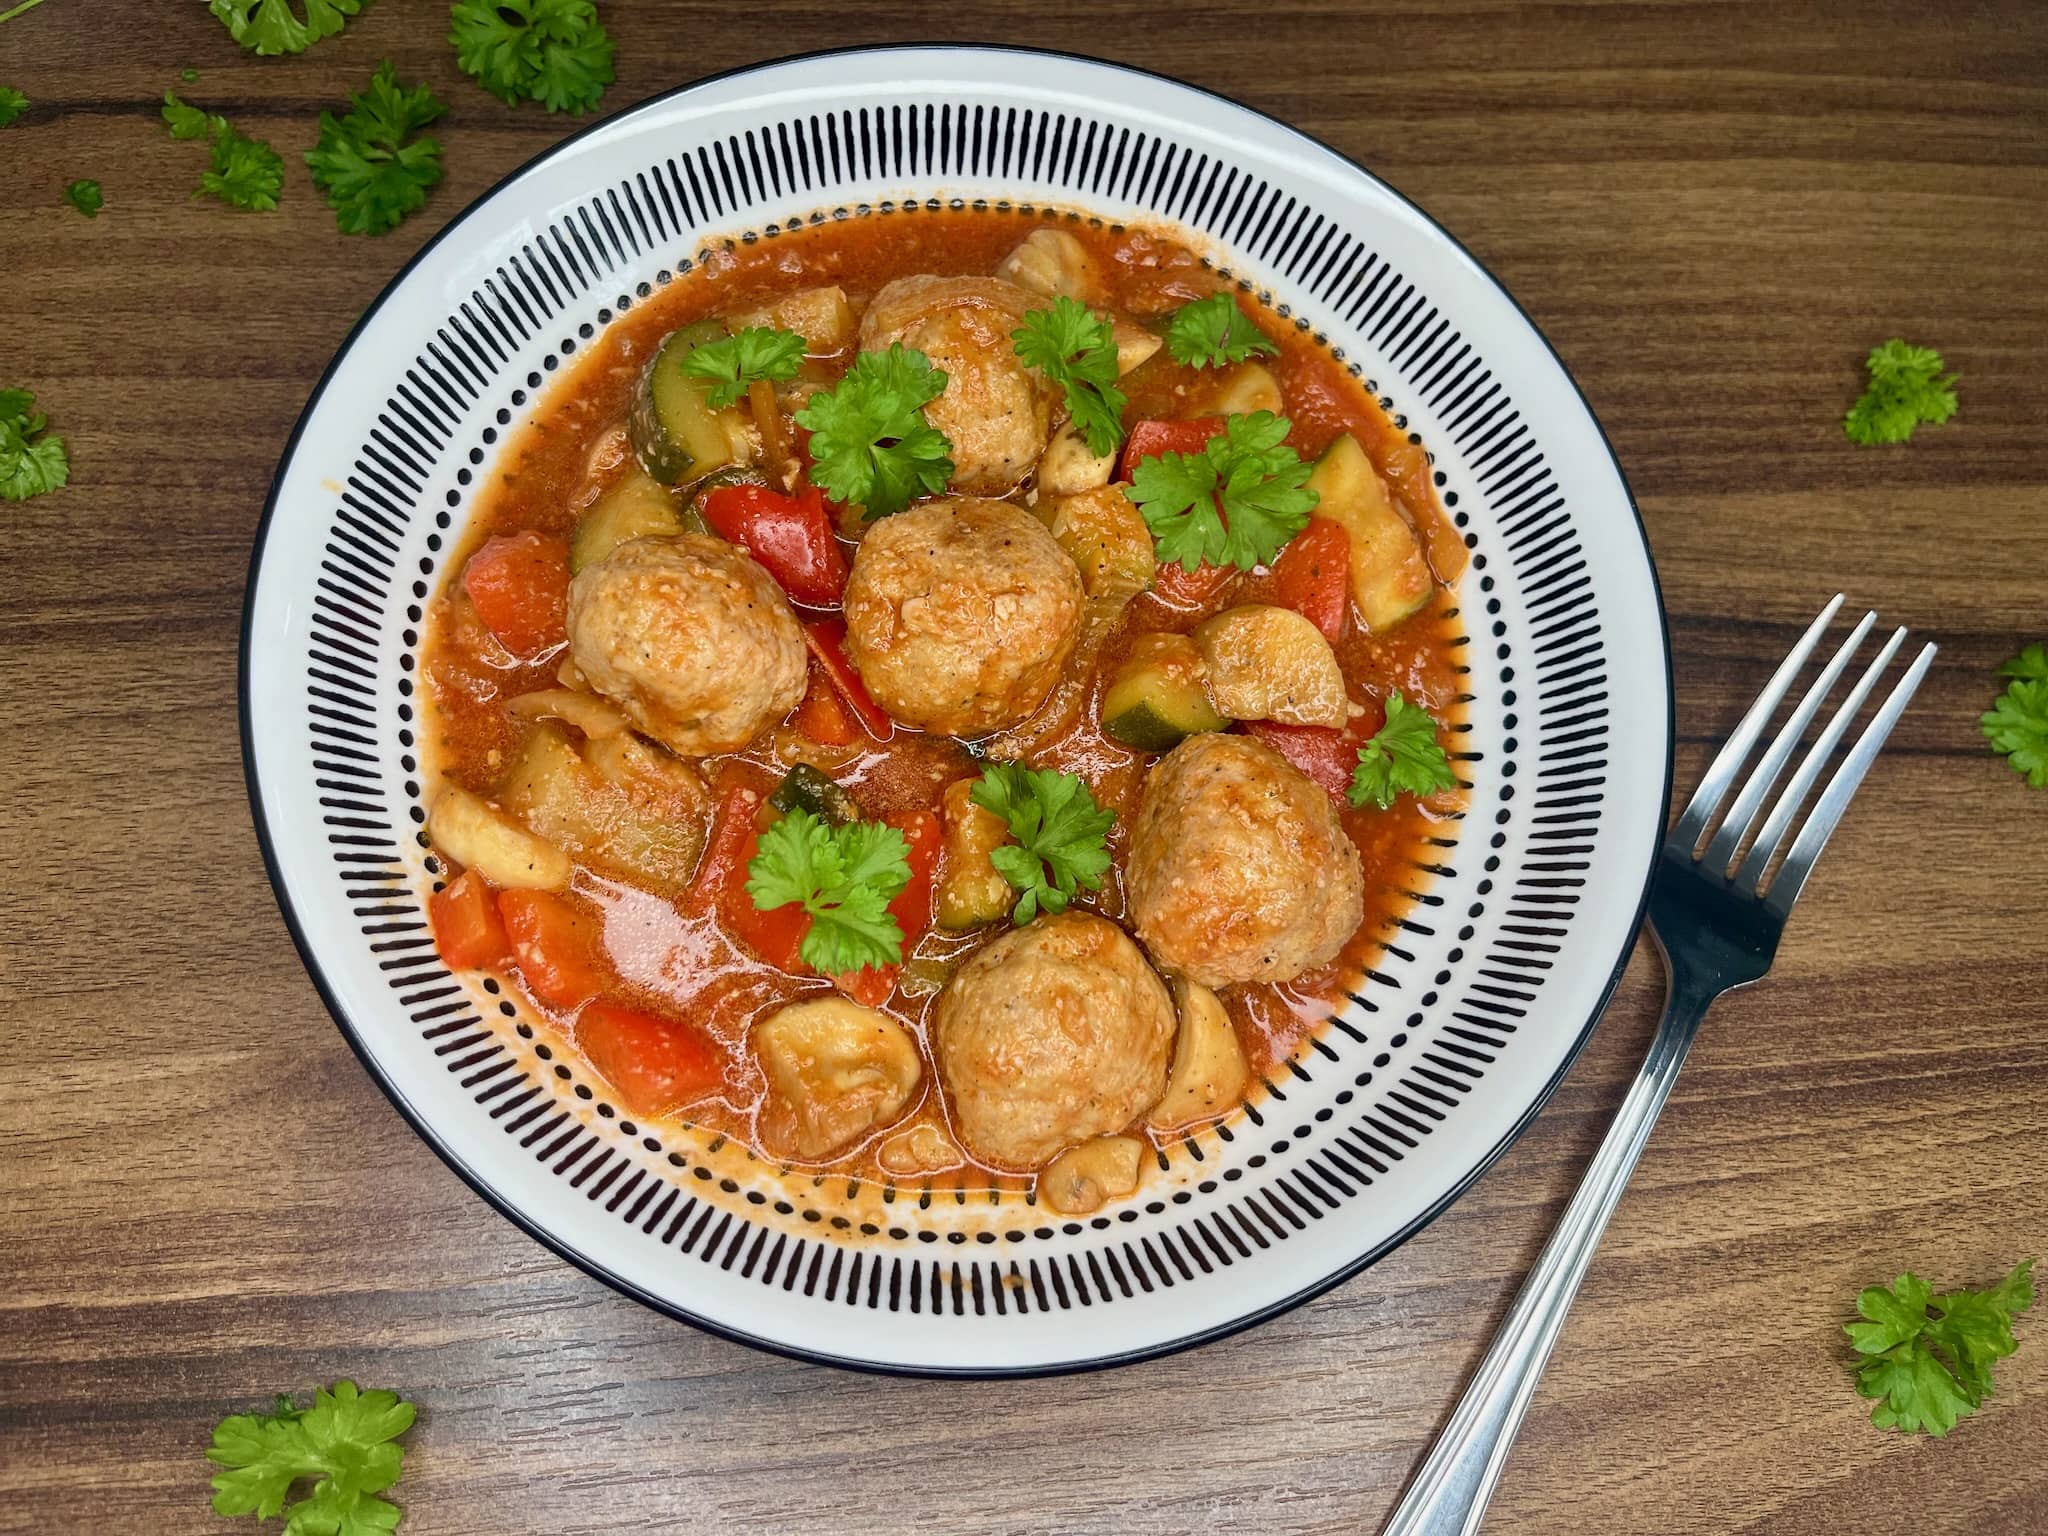 A bowl of meatballs in vegetable stew, surrounded by scattered parsley on a tabletop, is ready to be served.